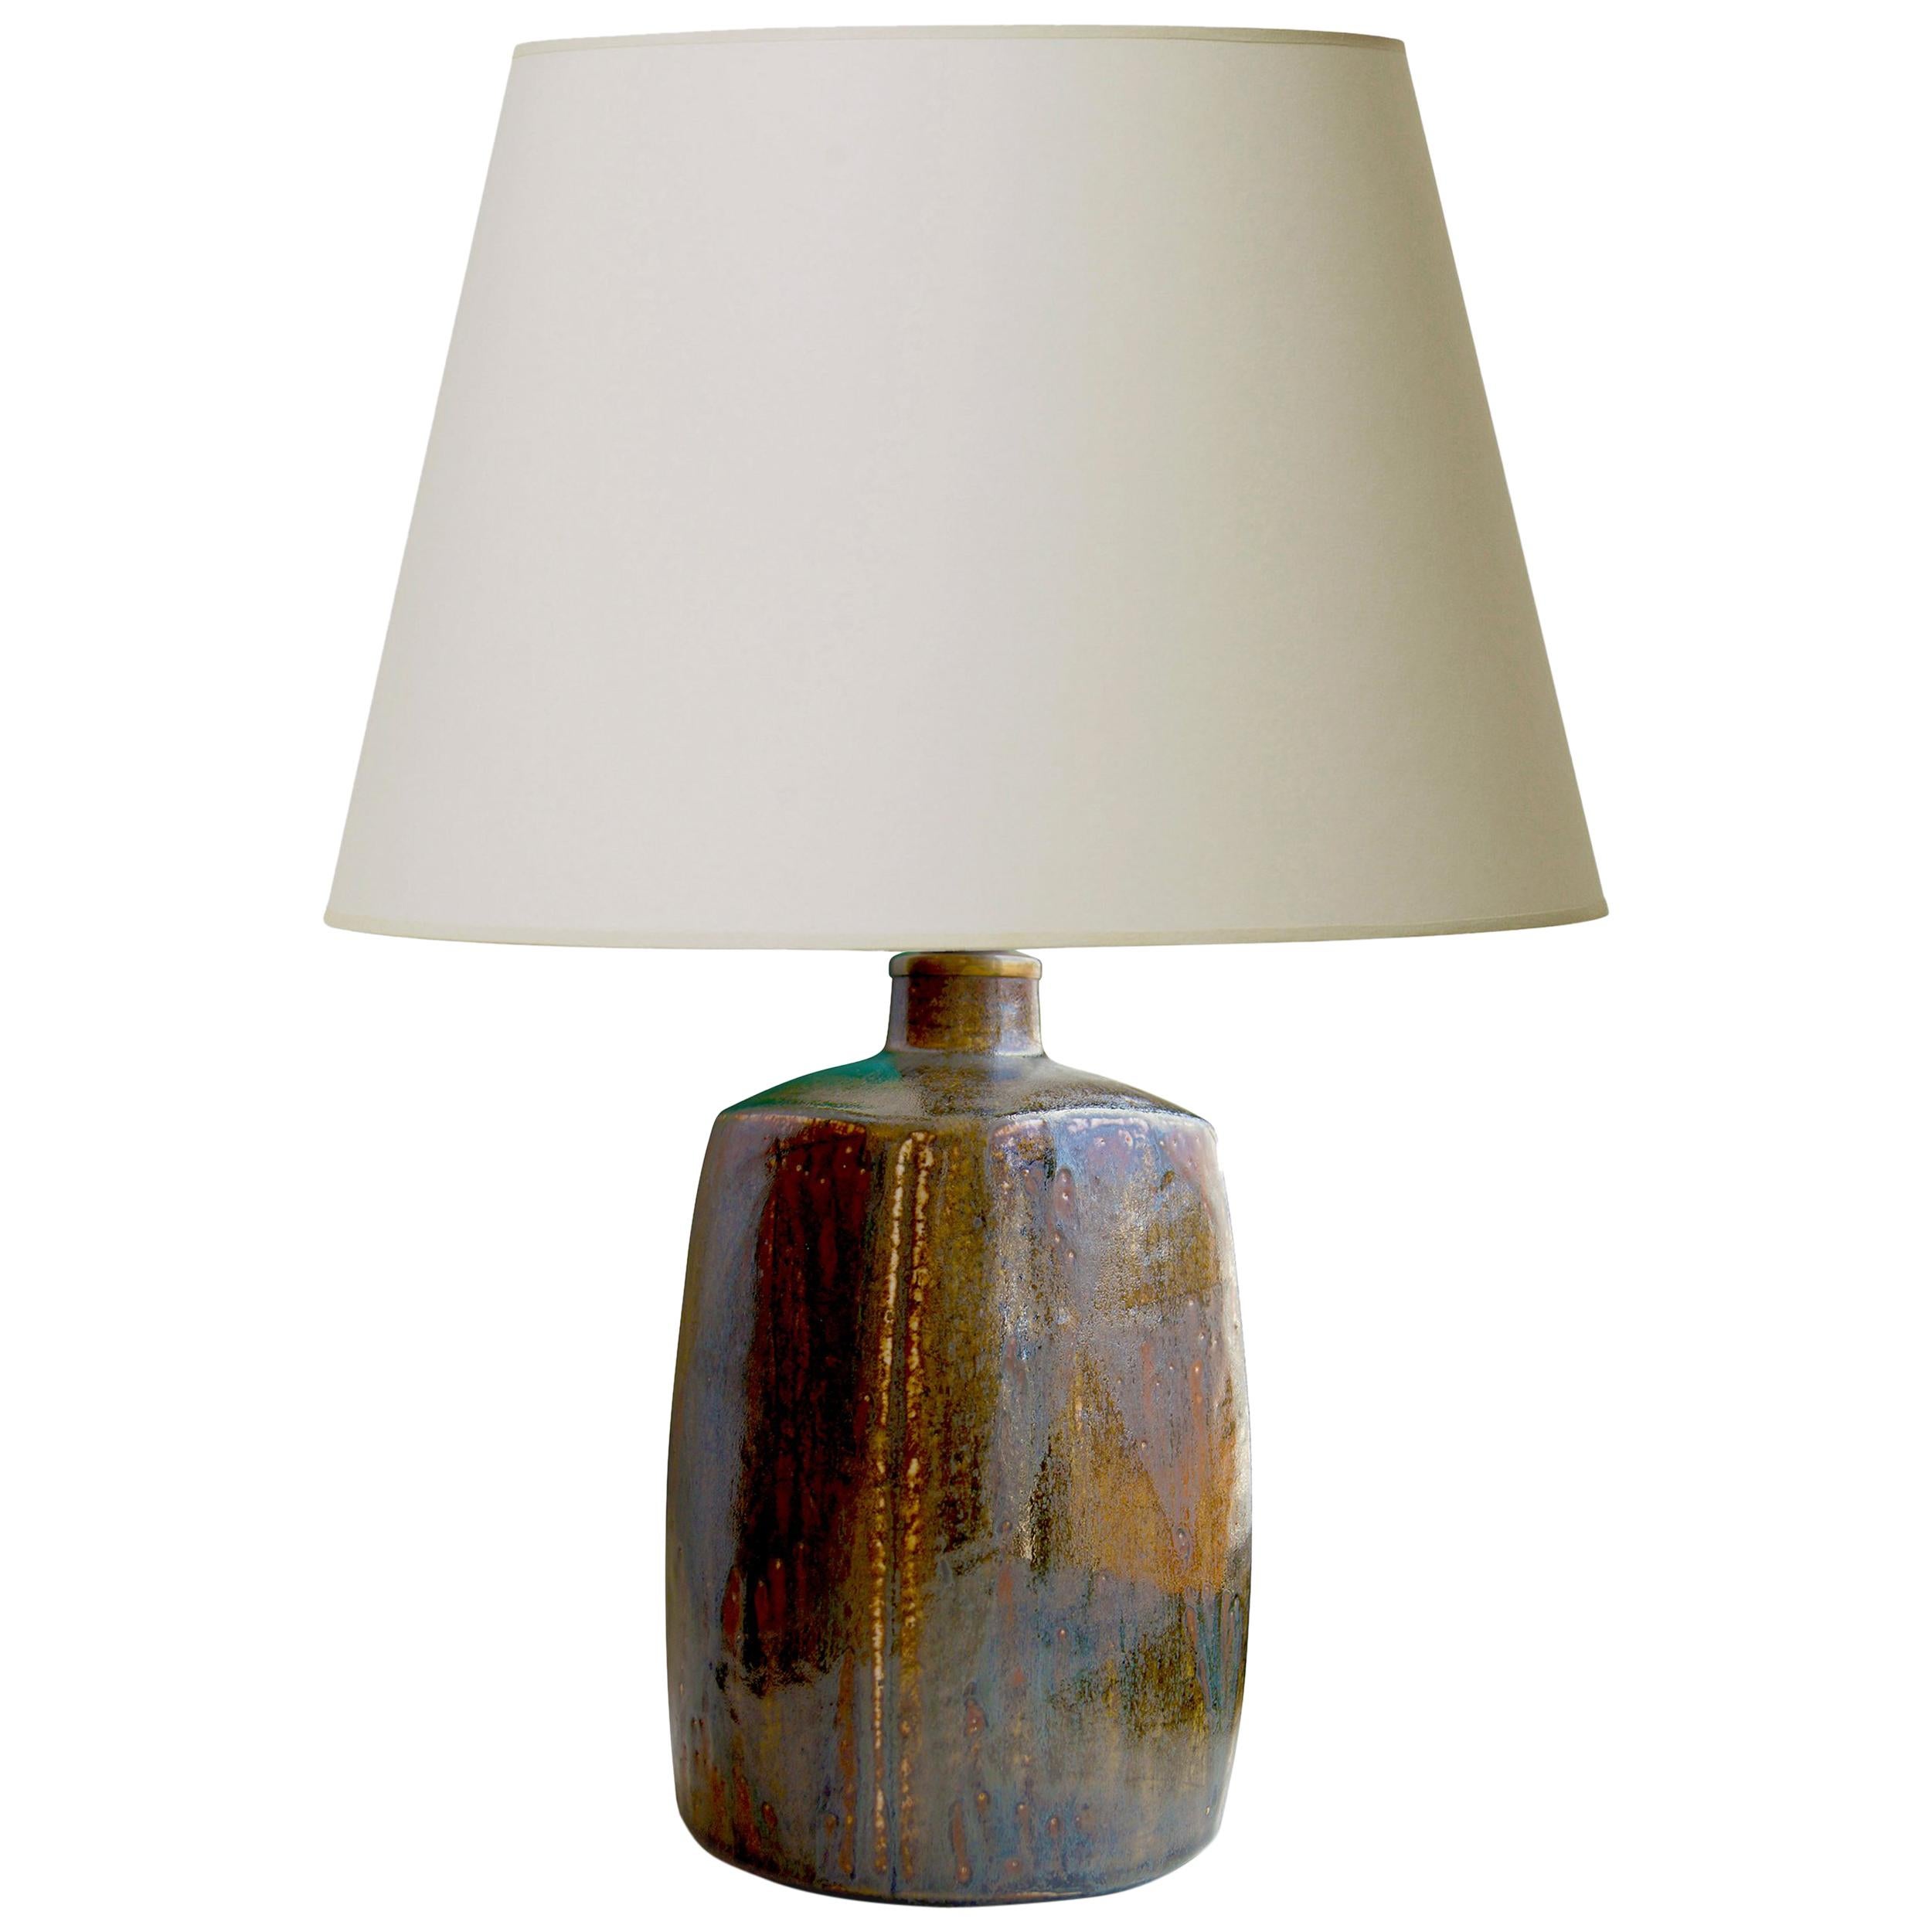 Organically Modeled Table Lamp with Tonal Geometric Design by Eva Staehr Nielsen For Sale